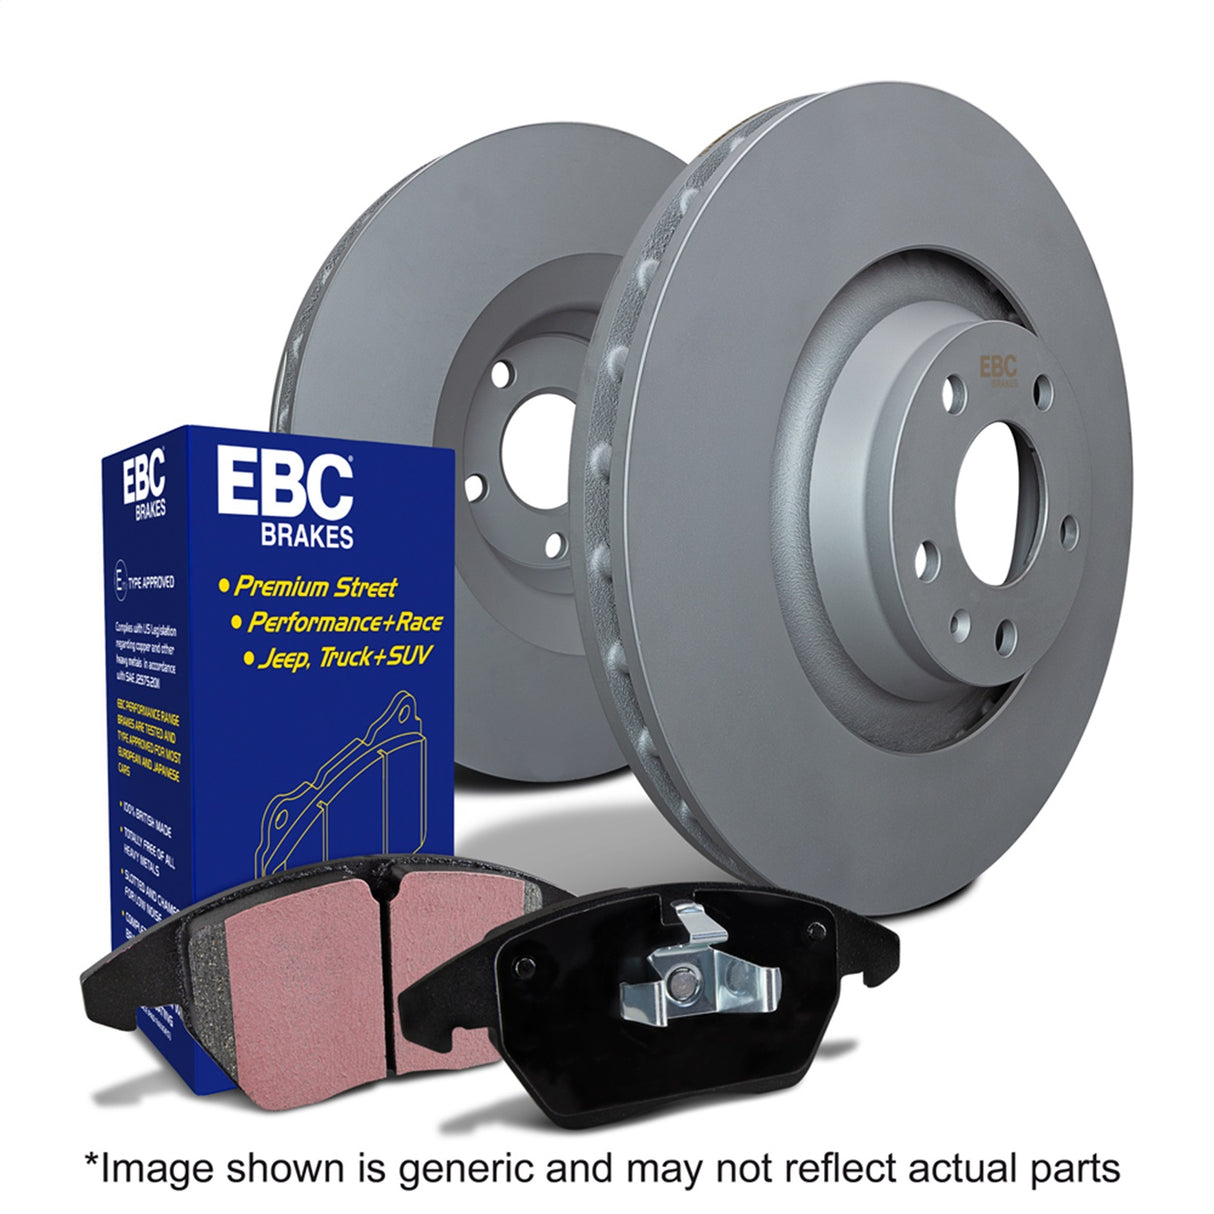 EBC Brakes S20K1307 S20 Kits Ultimax and Plain Rotors - Roam Overland Outfitters